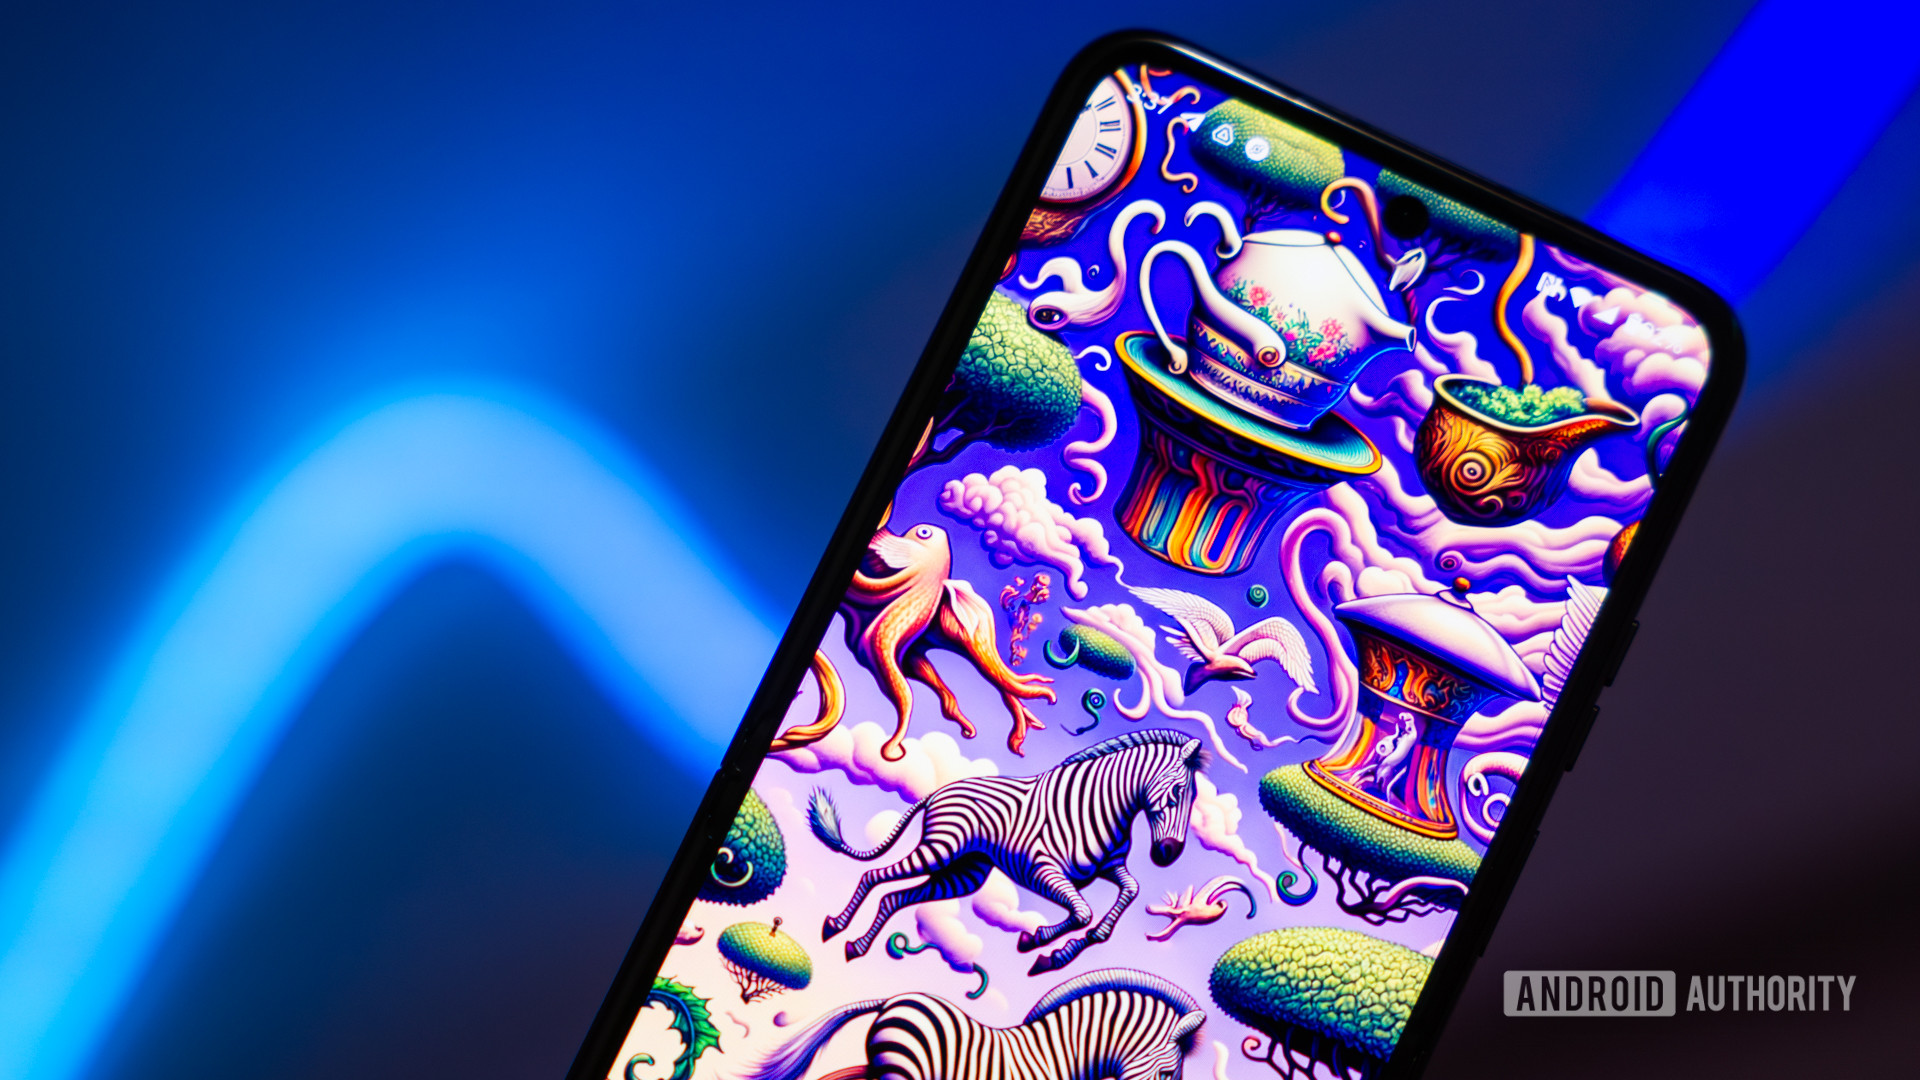 Download these eccentric wallpapers for your phone